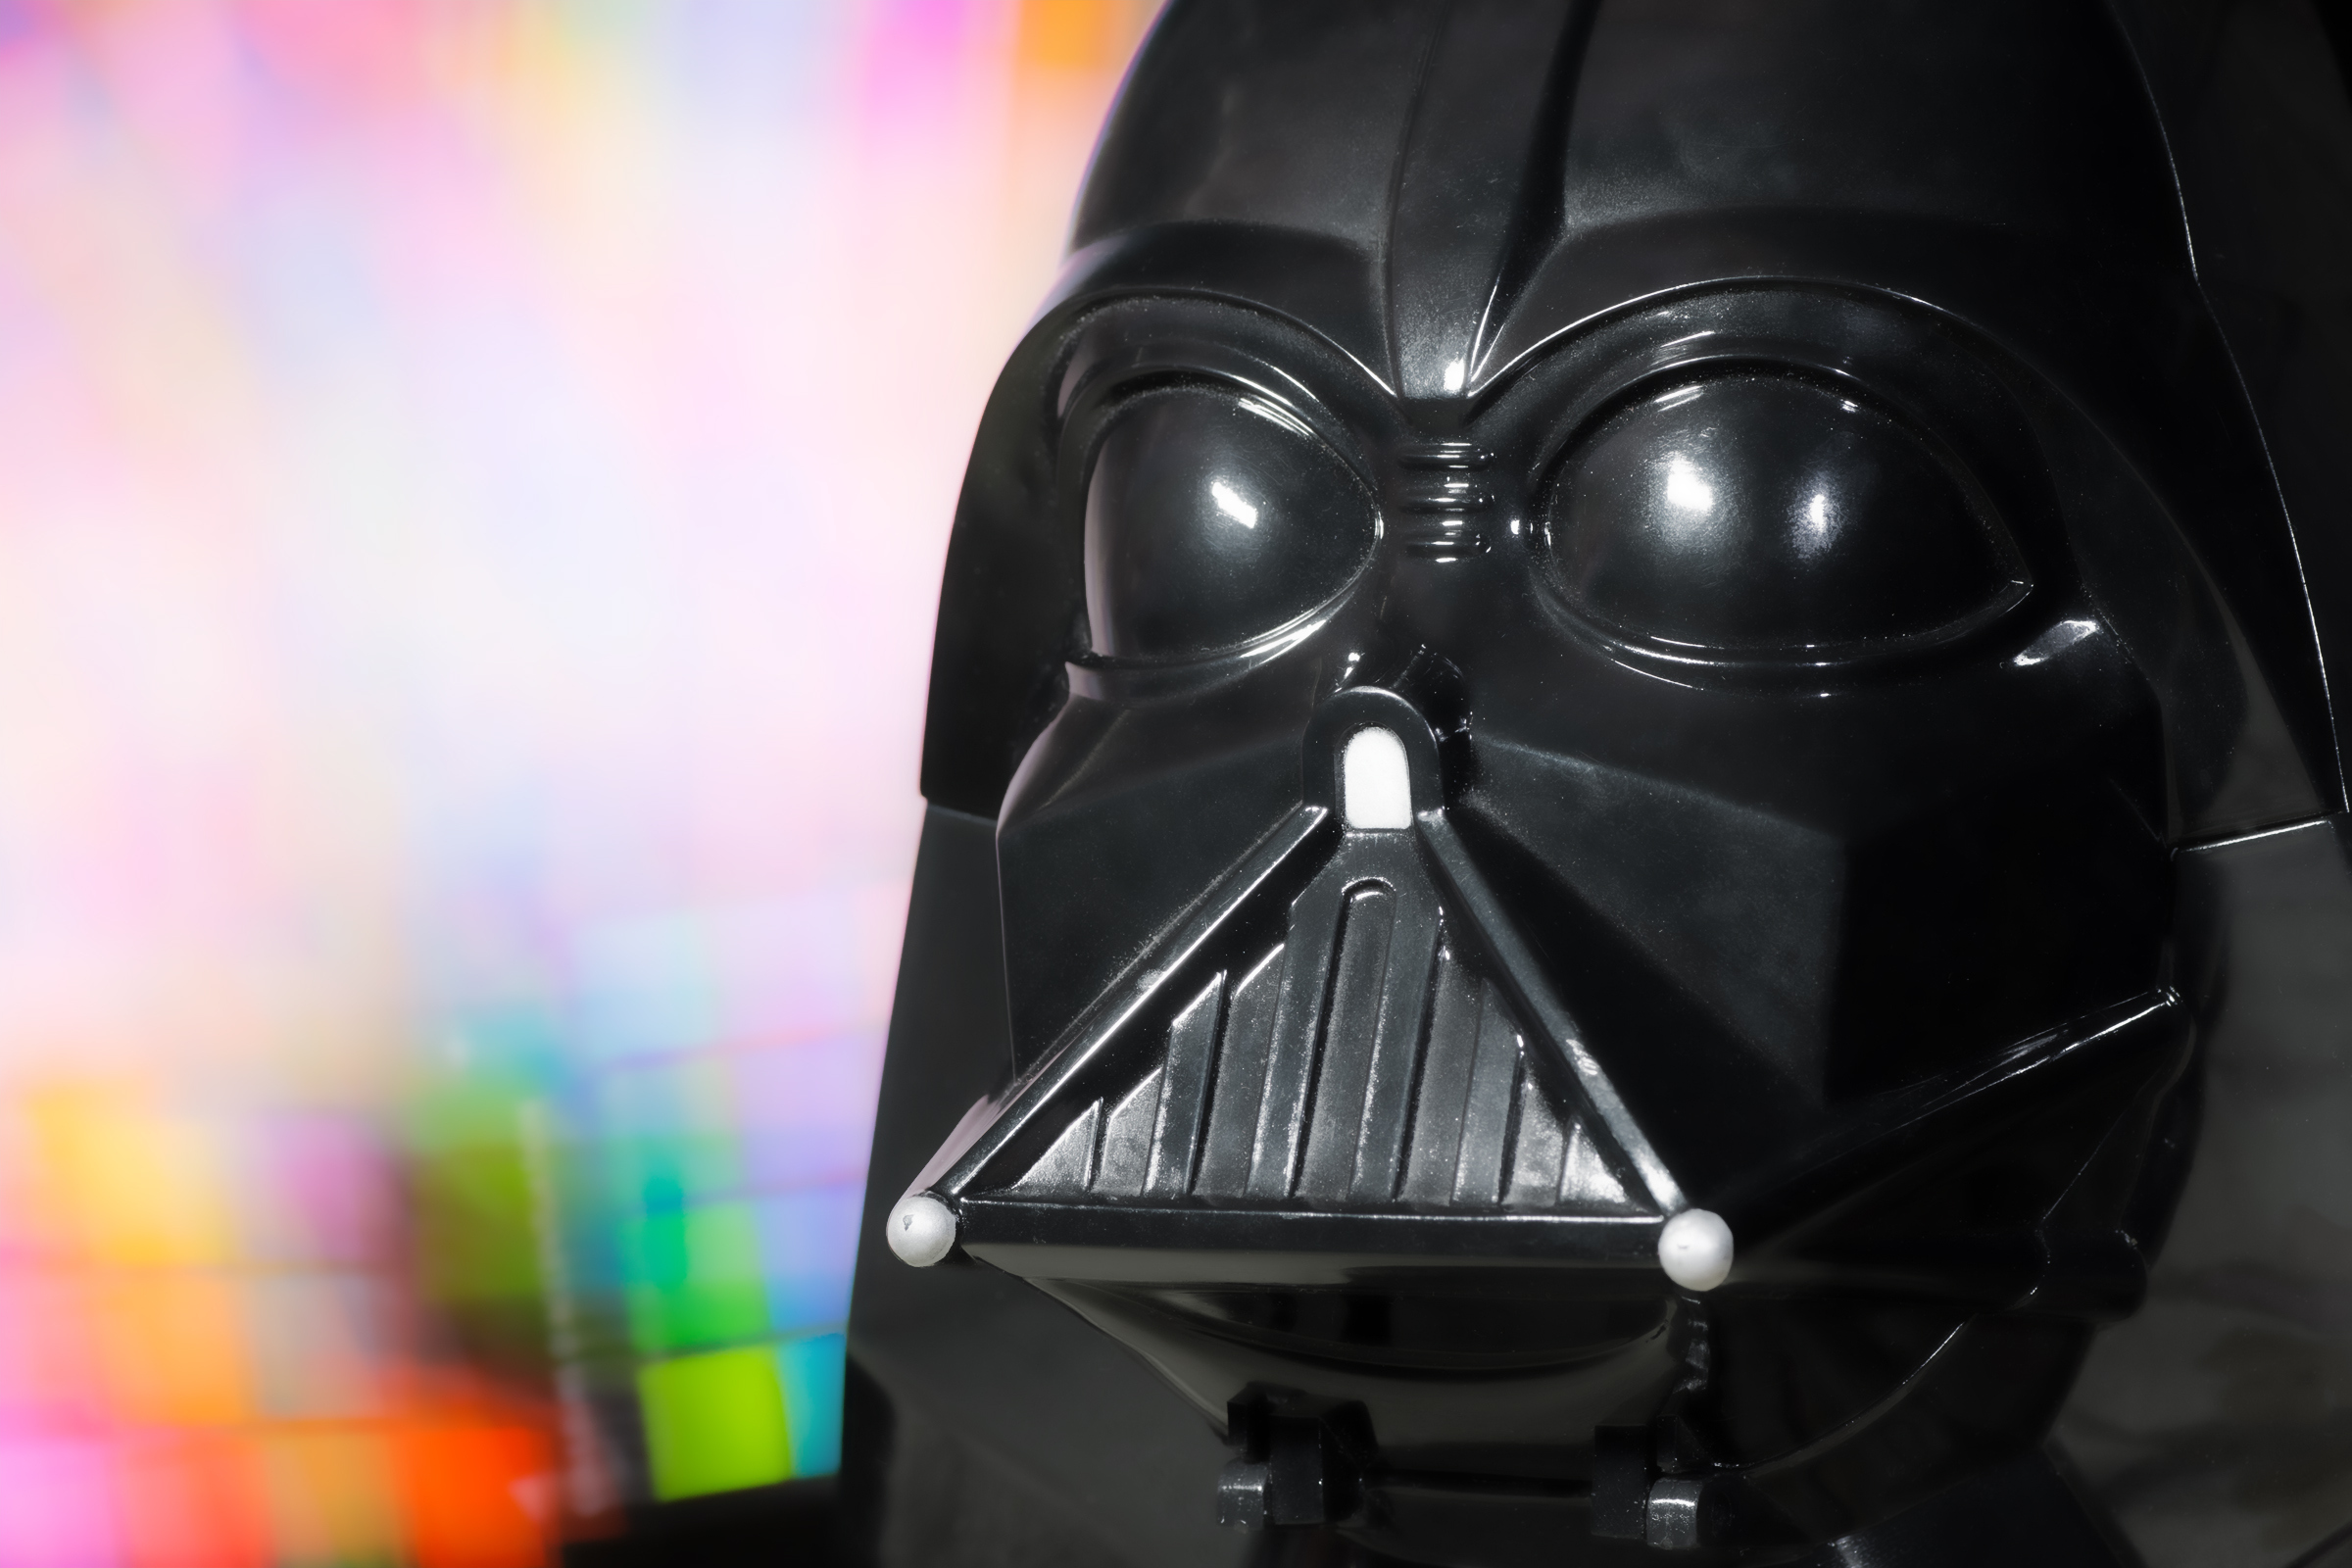 Head portrait mask costume of Darth Vader character, represents the Dark Side of the force, and he is the Luke Skywalker's father. Head portrait of Darth Vader which has been shot on colored light painting background. He is a fictional main character personnage, from the Star Wars saga films created by George Lucas in 1977 (LucasFilm ldt).